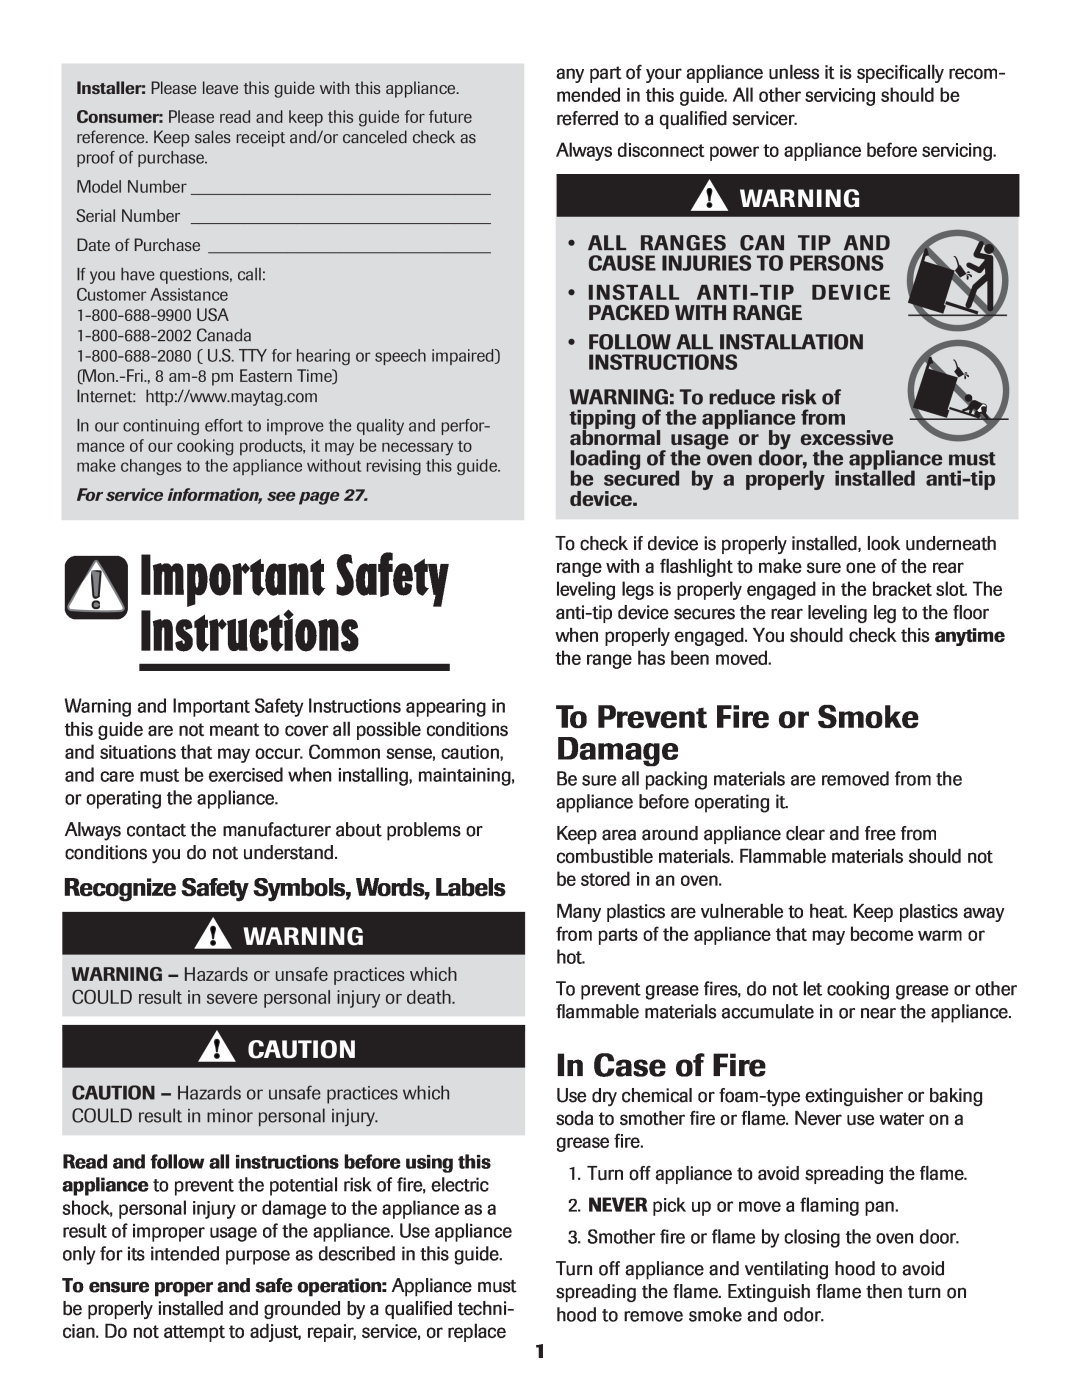 Maytag MER5875RAF manual Instructions, Important Safety, To Prevent Fire or Smoke Damage, In Case of Fire 